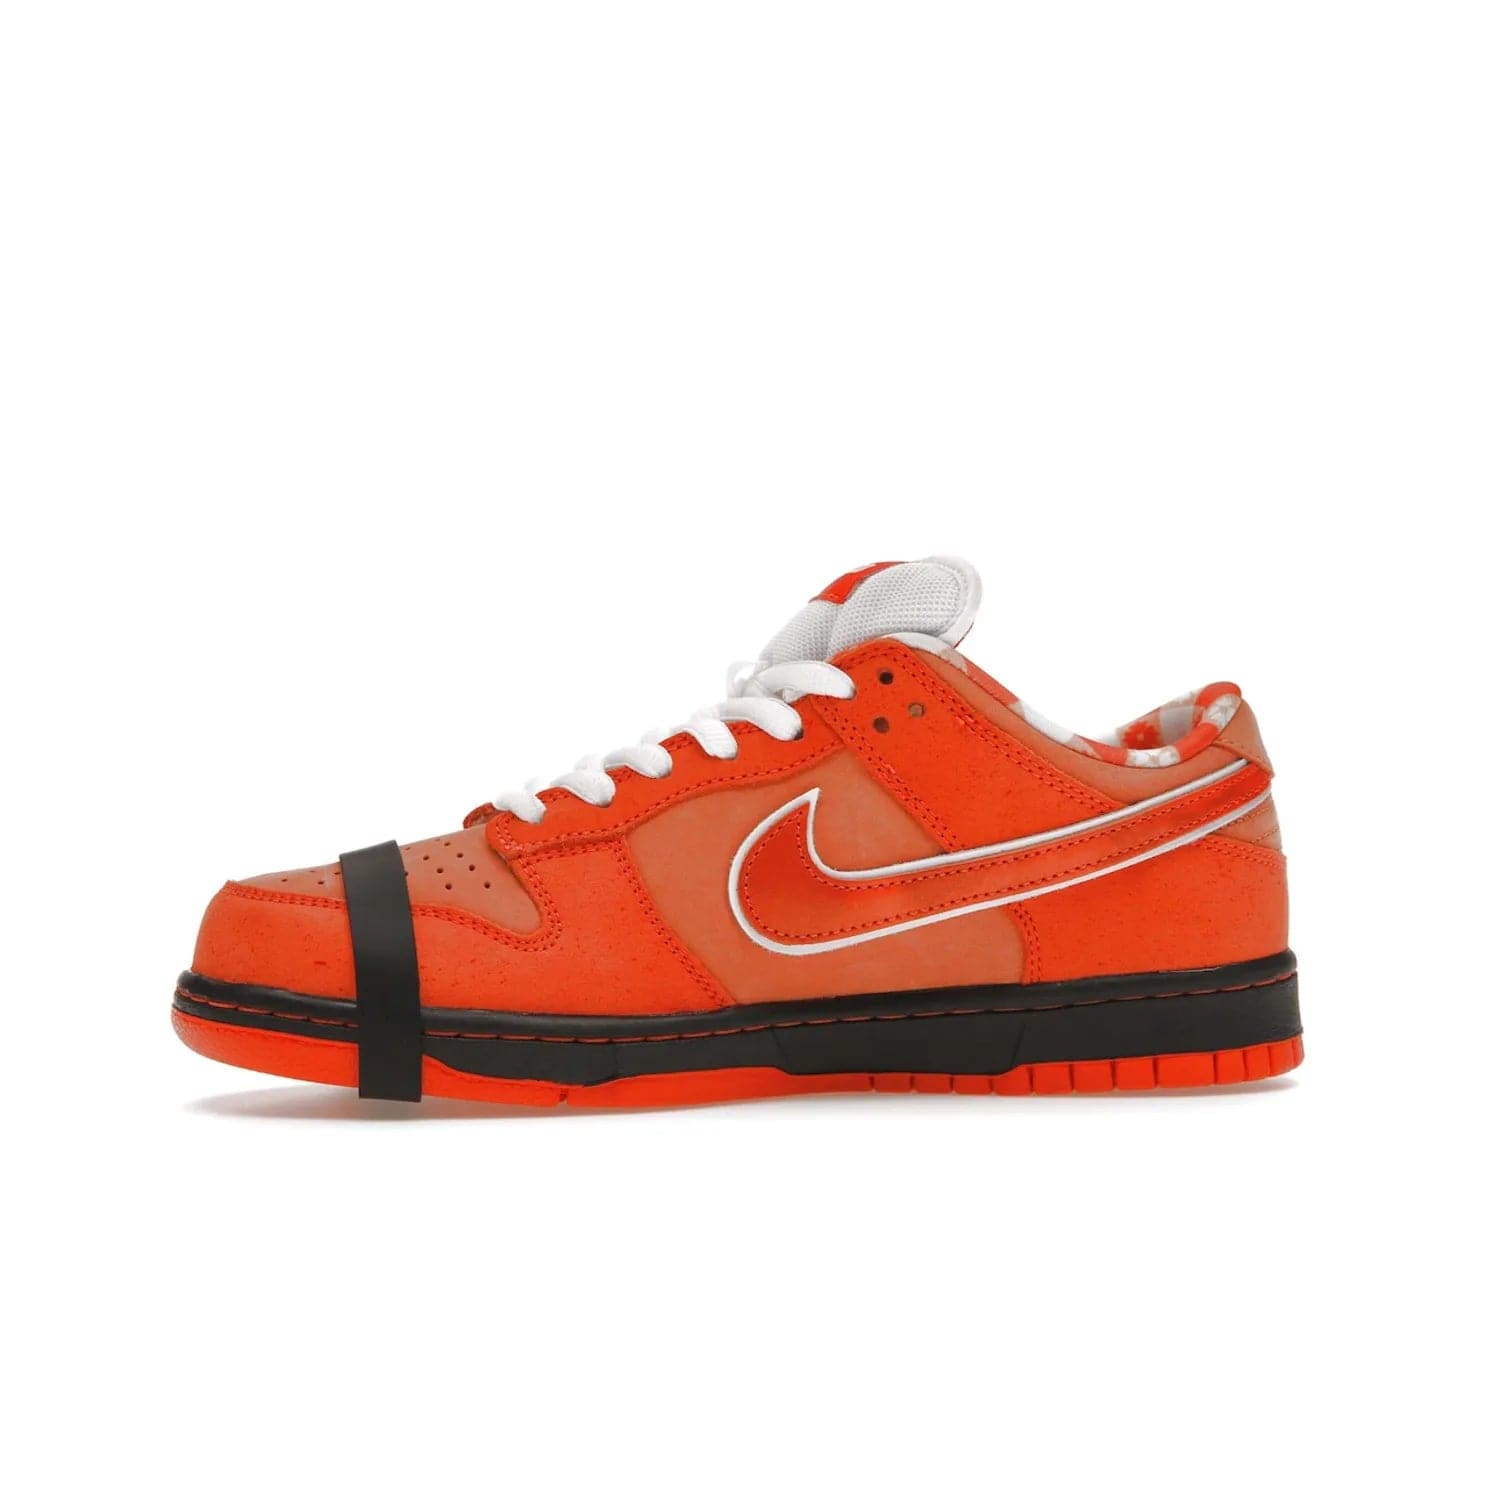 Nike SB Dunk Low Concepts Orange Lobster - Image 18 - Only at www.BallersClubKickz.com - Make a statement with the Nike SB Dunk Low Concepts Orange Lobster. Variety of orange hues, nubuck upper, bib-inspired lining & rubber outsole create bold look & comfortable blend of style. Available December 20th, 2022.